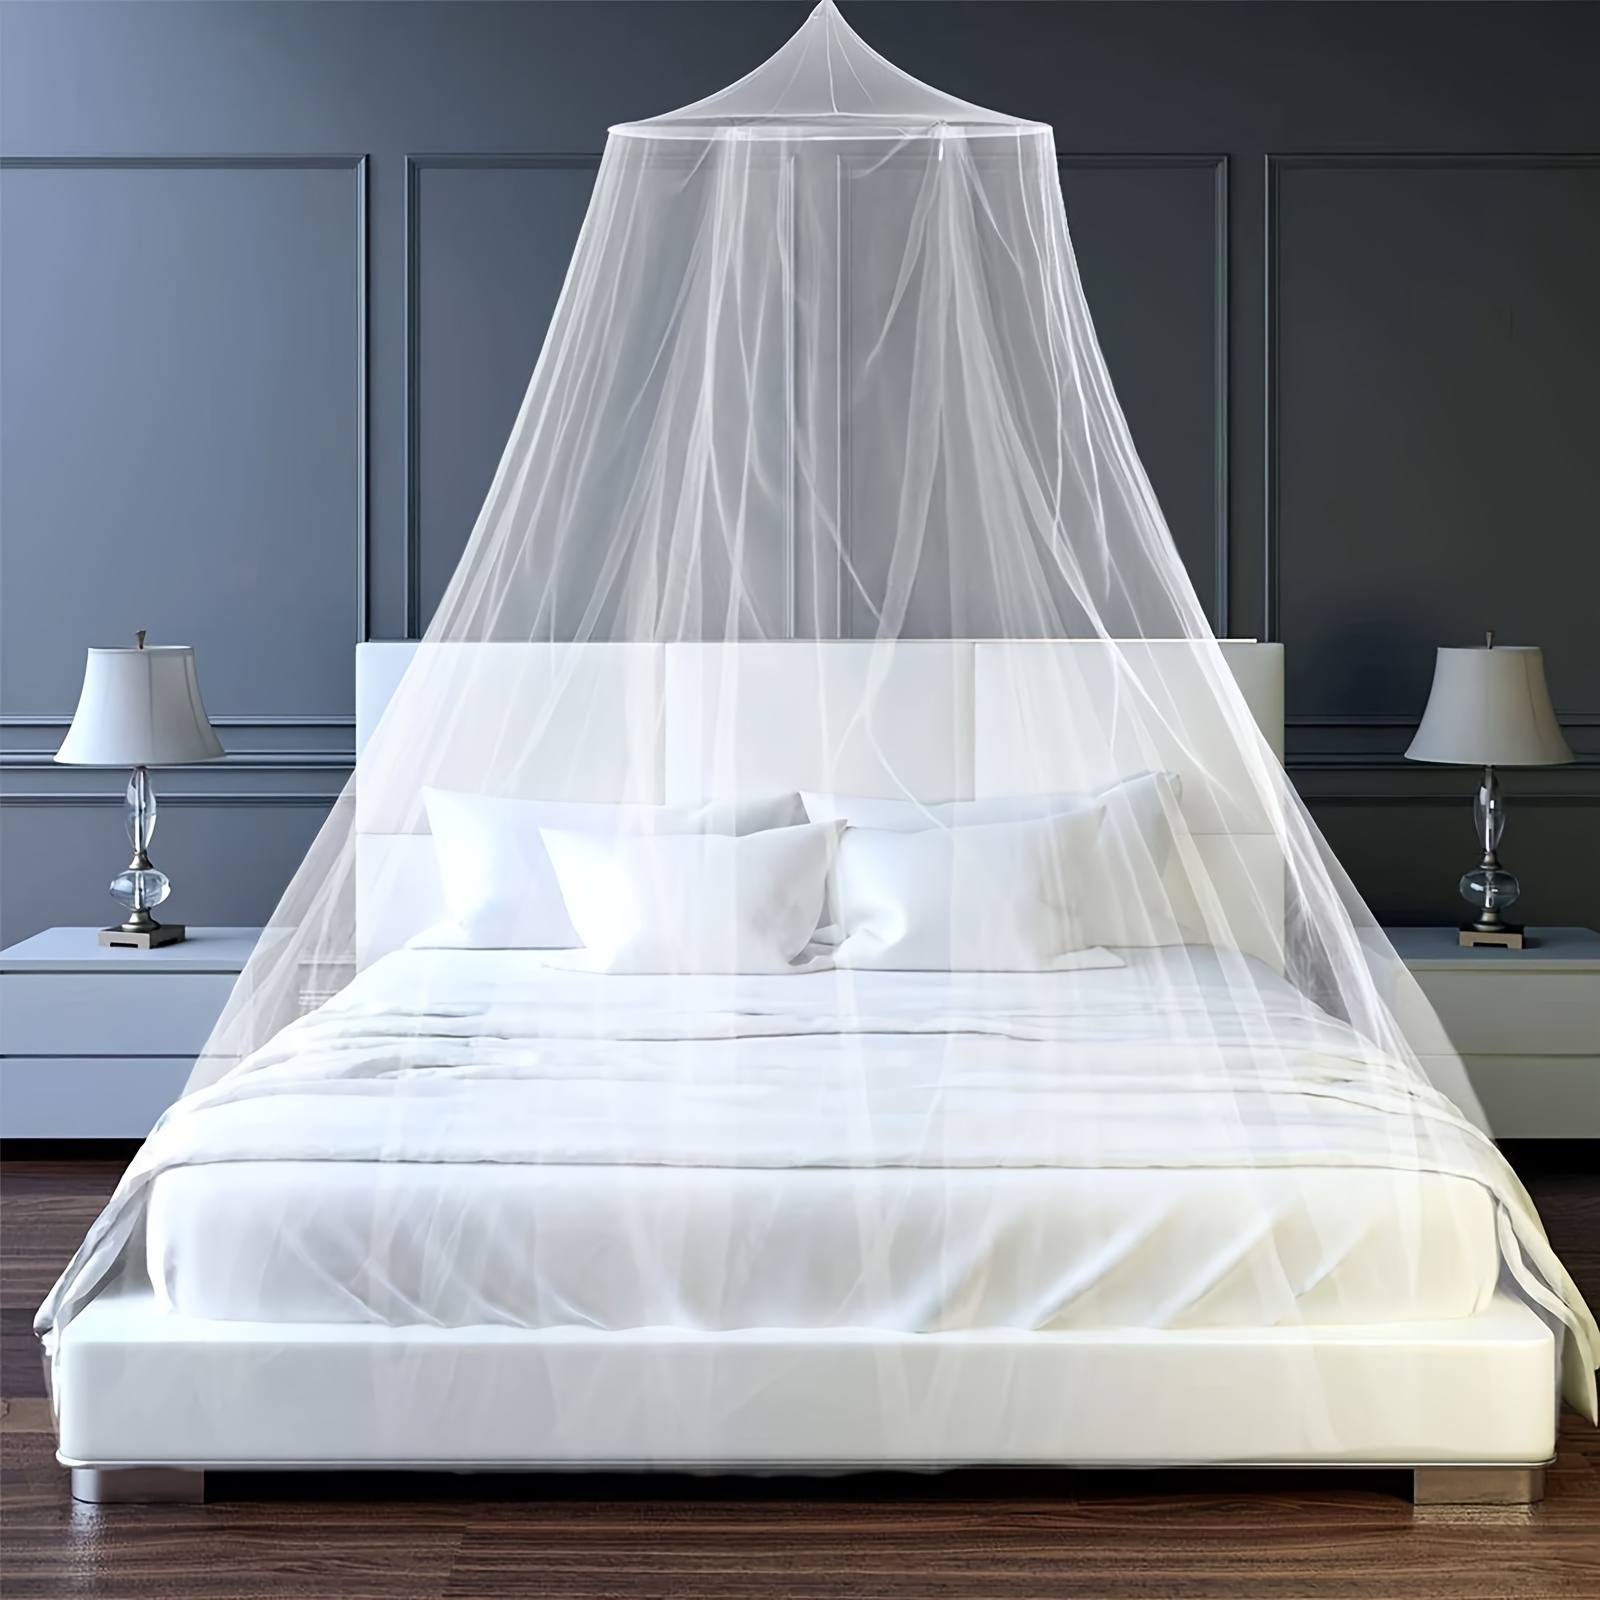 

Encrypted Dome Mosquito Net, Bed Canopy For Room Decor, Insect Protection Hanging Canopy For Summer Comfort, No Opening